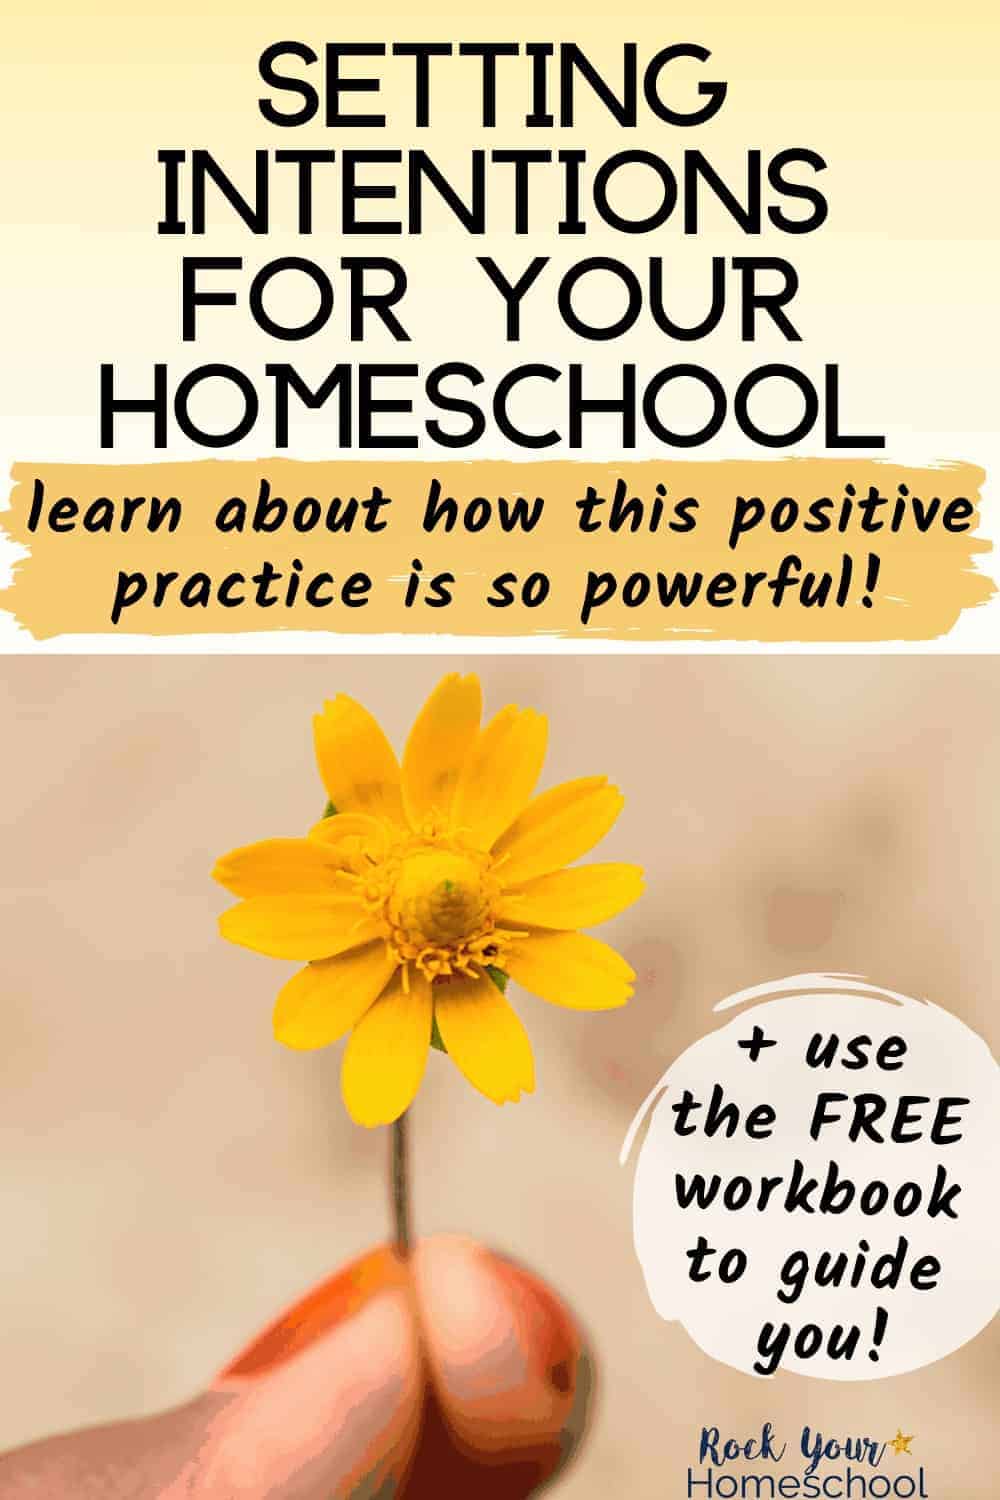 Why Setting Intentions is So Powerful for Your Homeschool